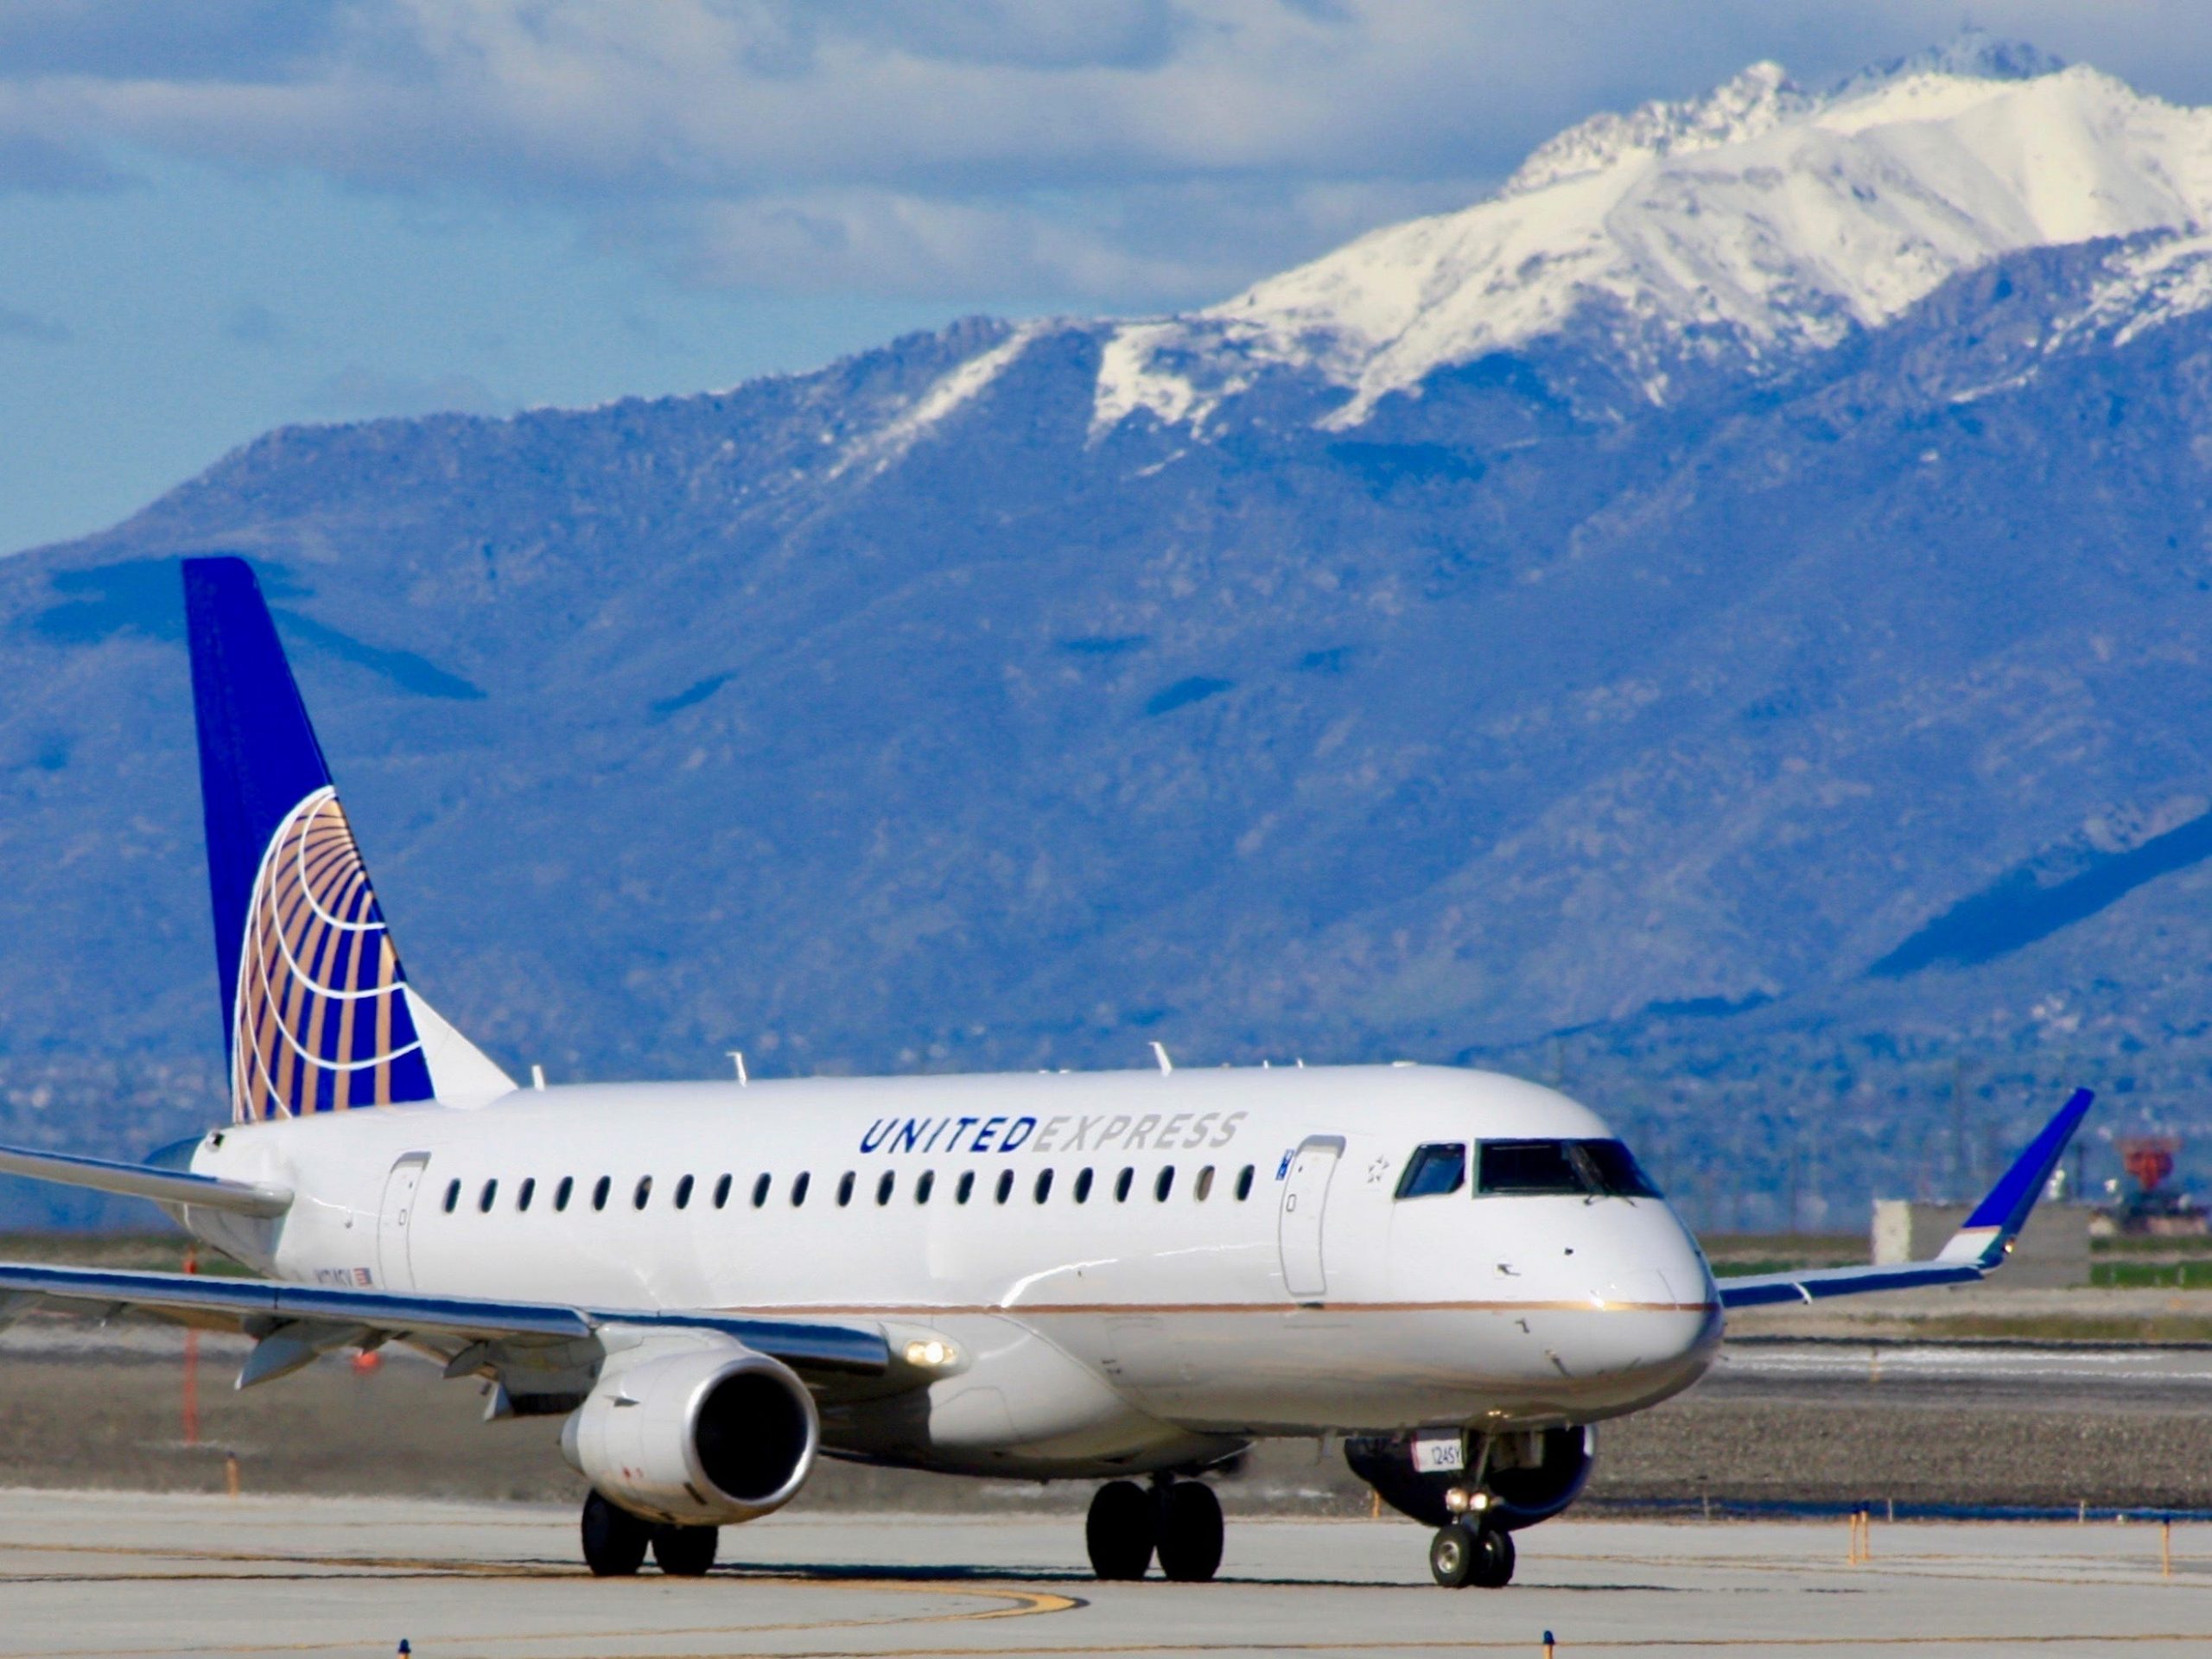 United Airlines Embraer E175